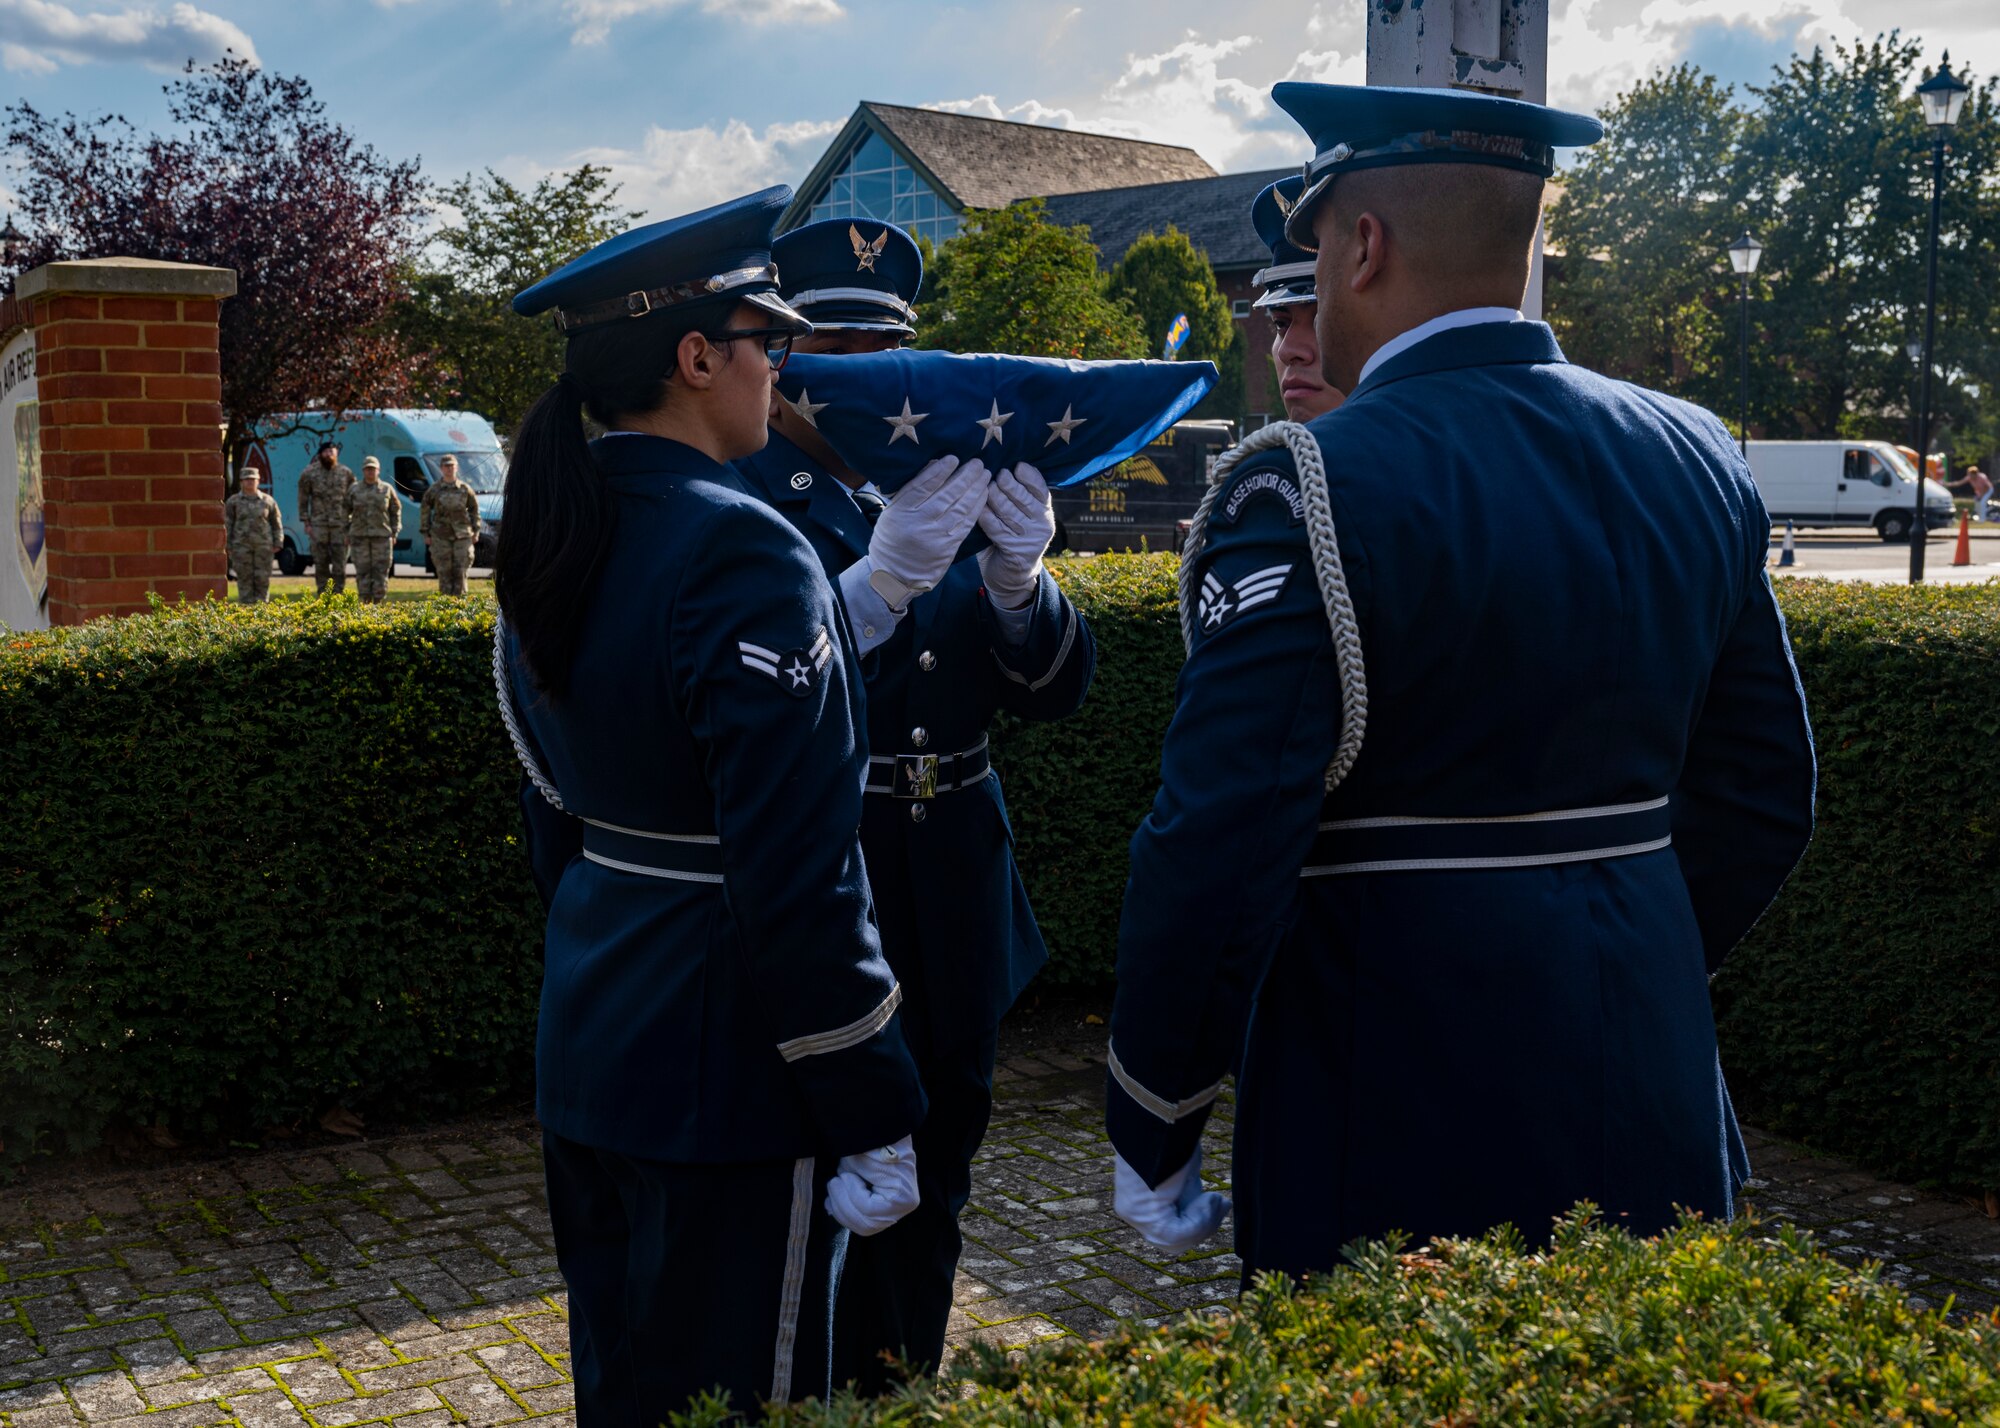 RAF Mildenhall held a vigil for POW/MIA Remembrance Week to honor and remember prisoners of war (POWs) and those missing in action (MIAs).